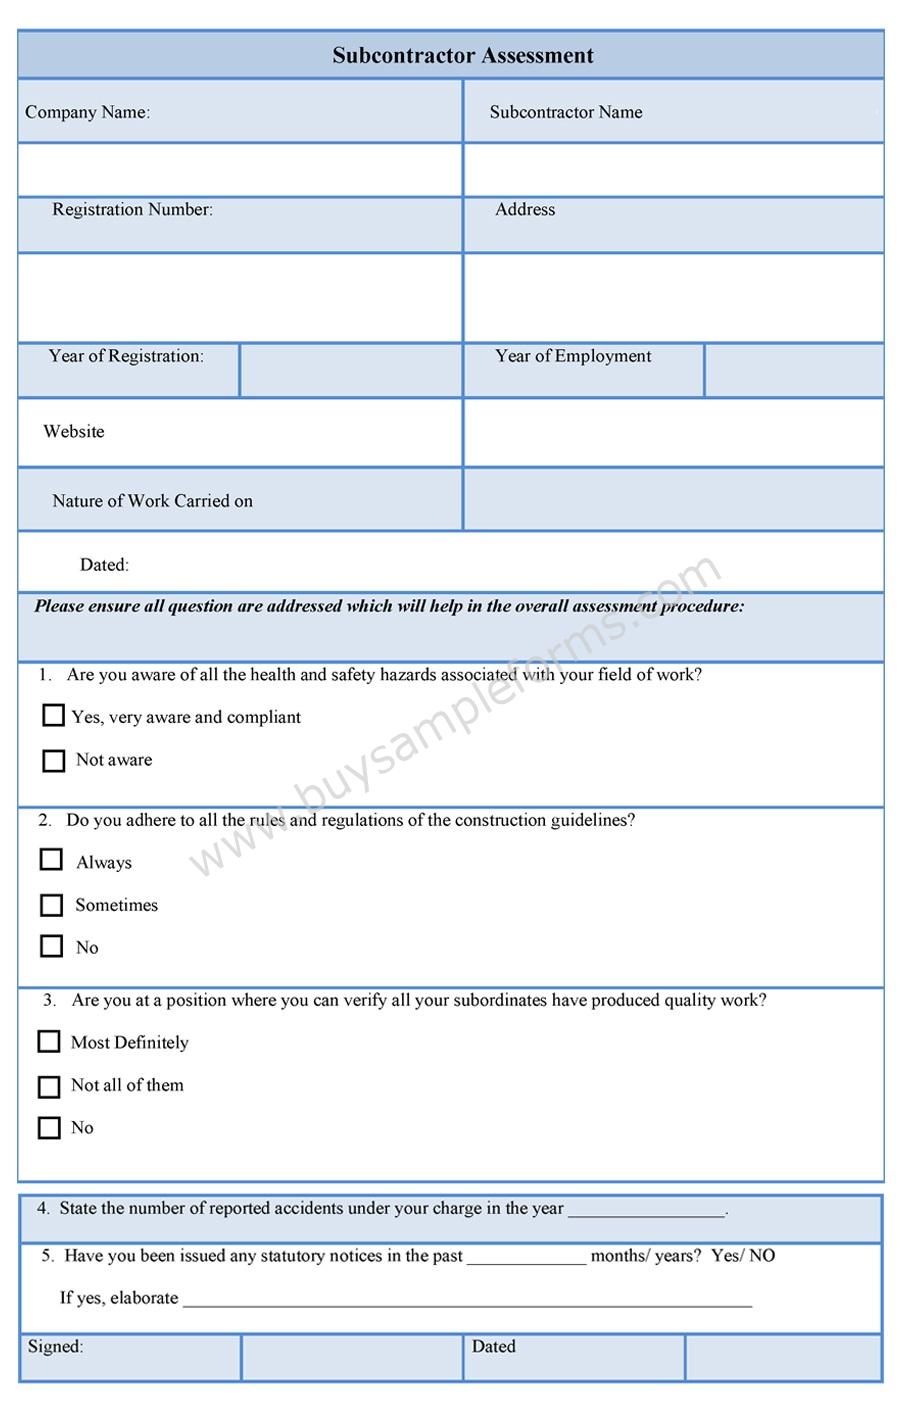 Subcontractor Assessment Form